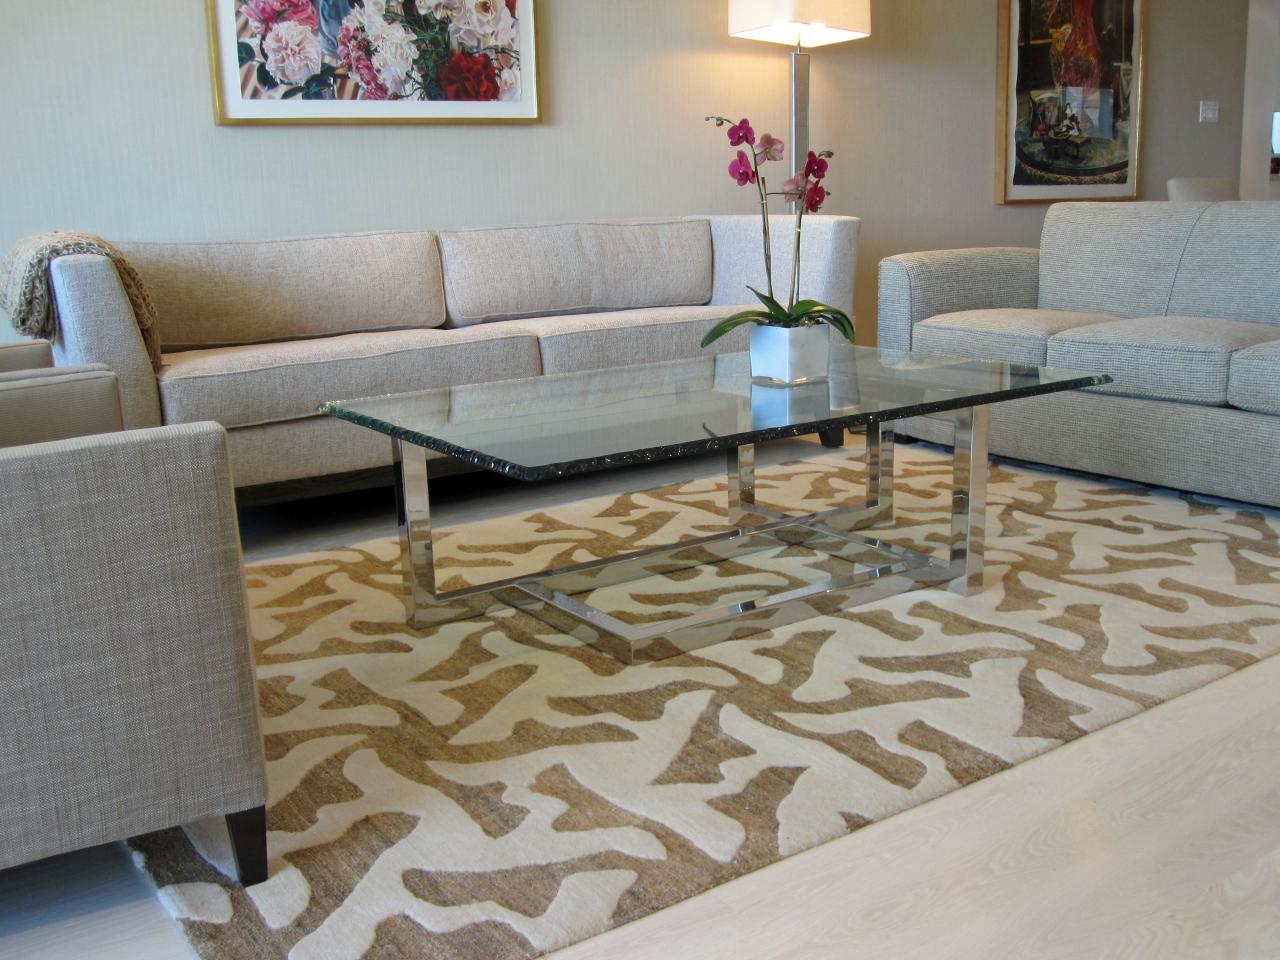 How To Choose Your Living Room Rug, How To Pick An Area Rug For Living Room